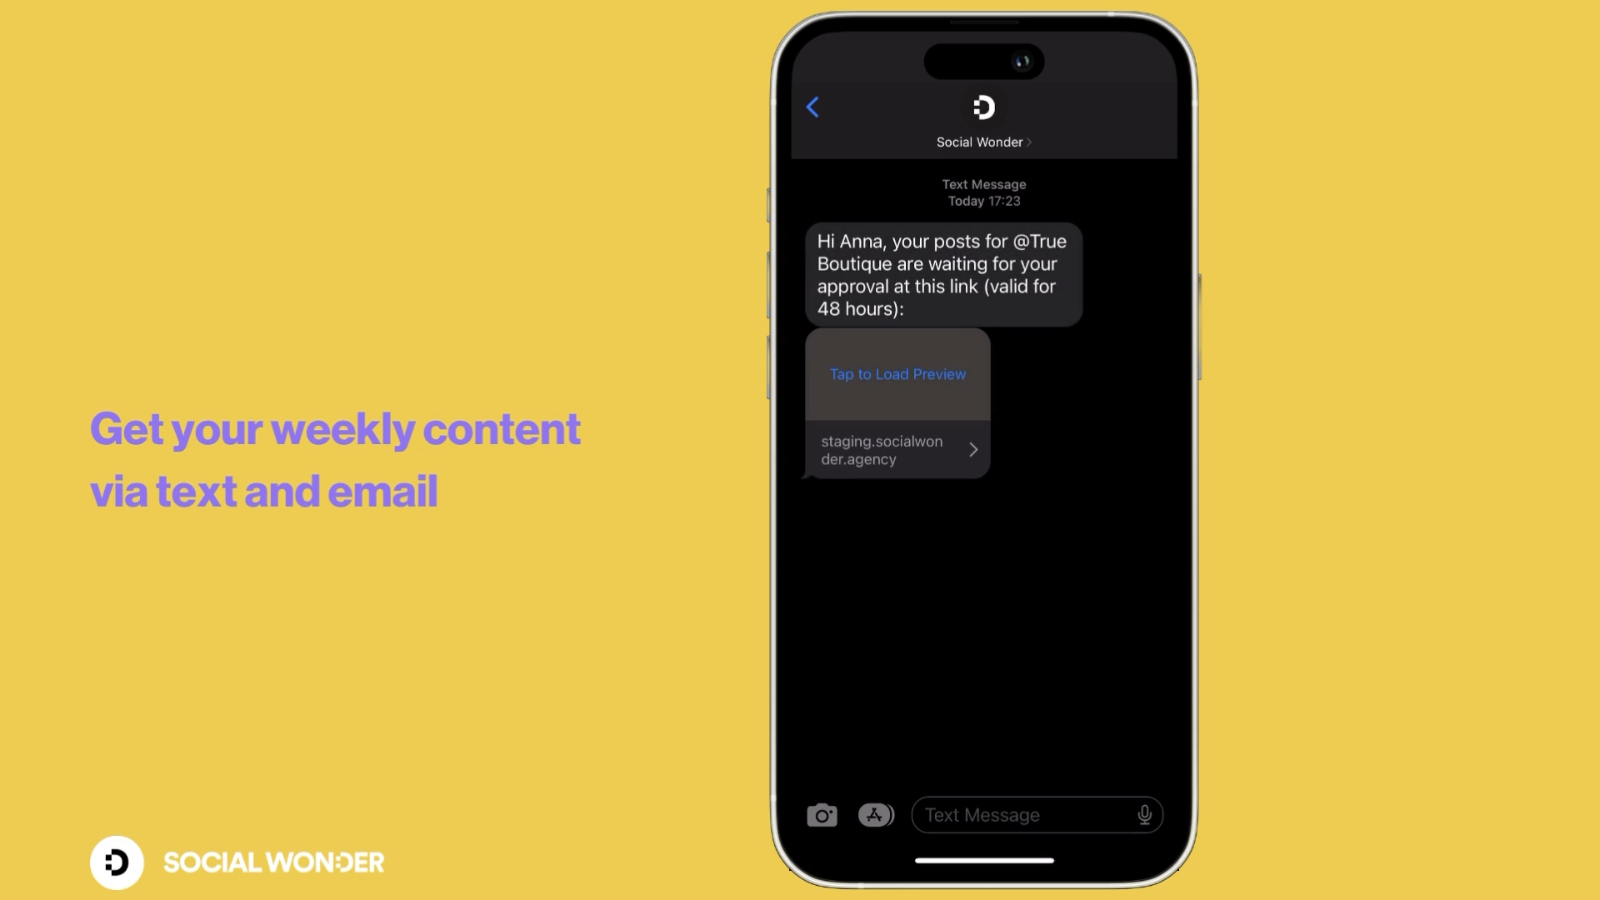 Get your weekly content by text and email